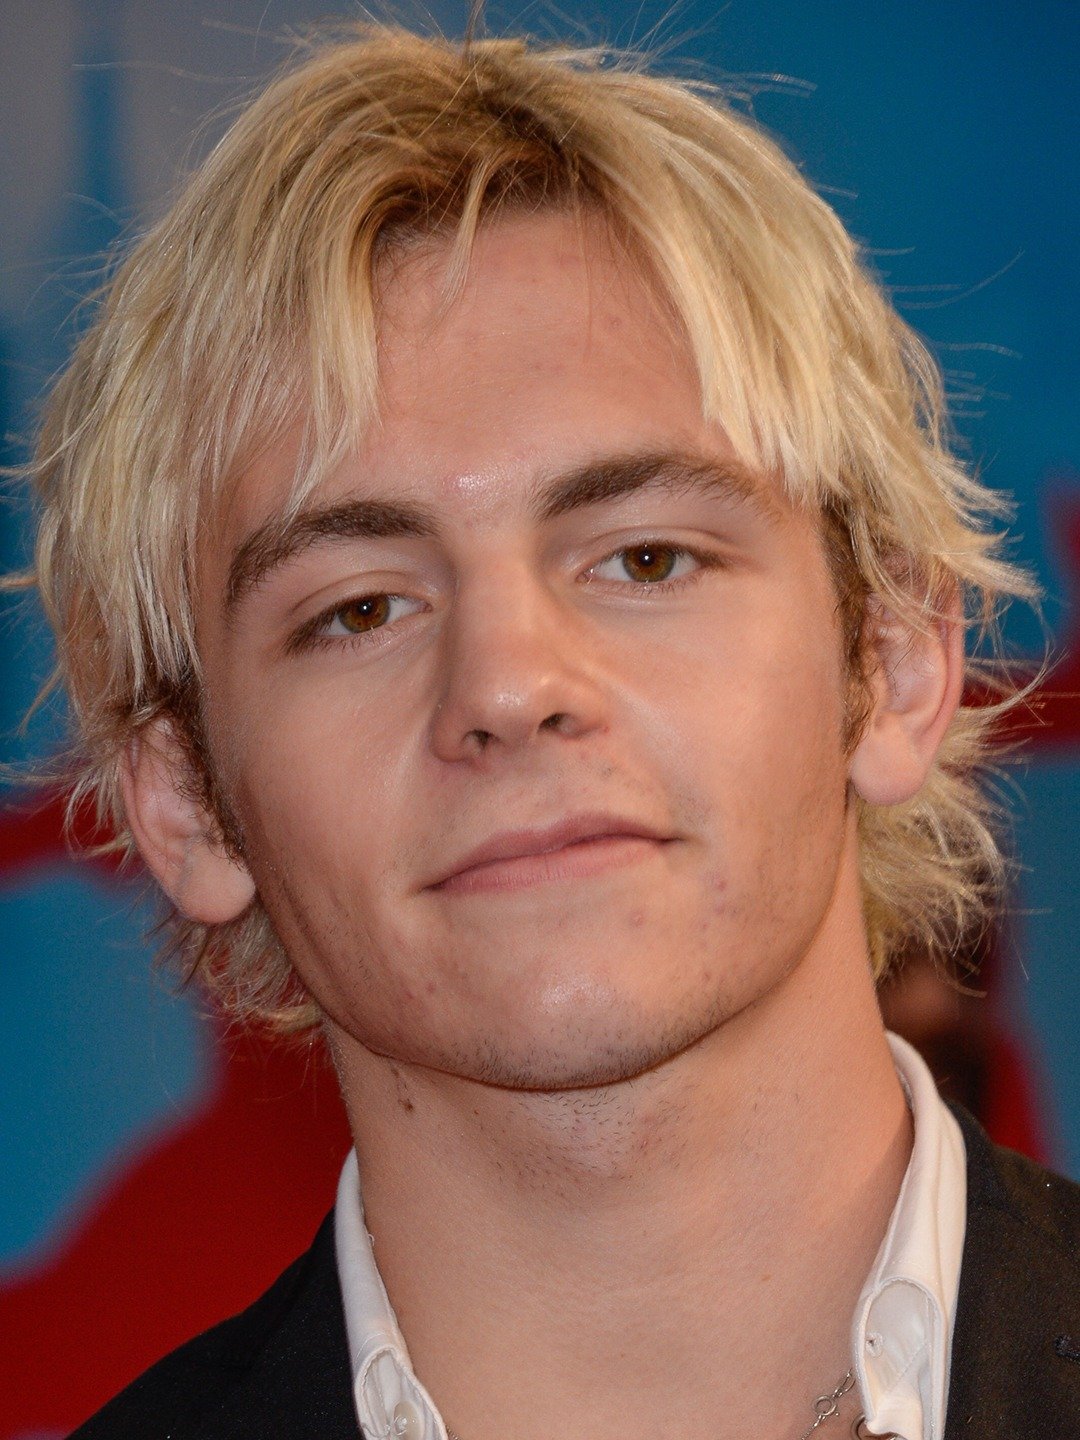 How tall is Ross Lynch?